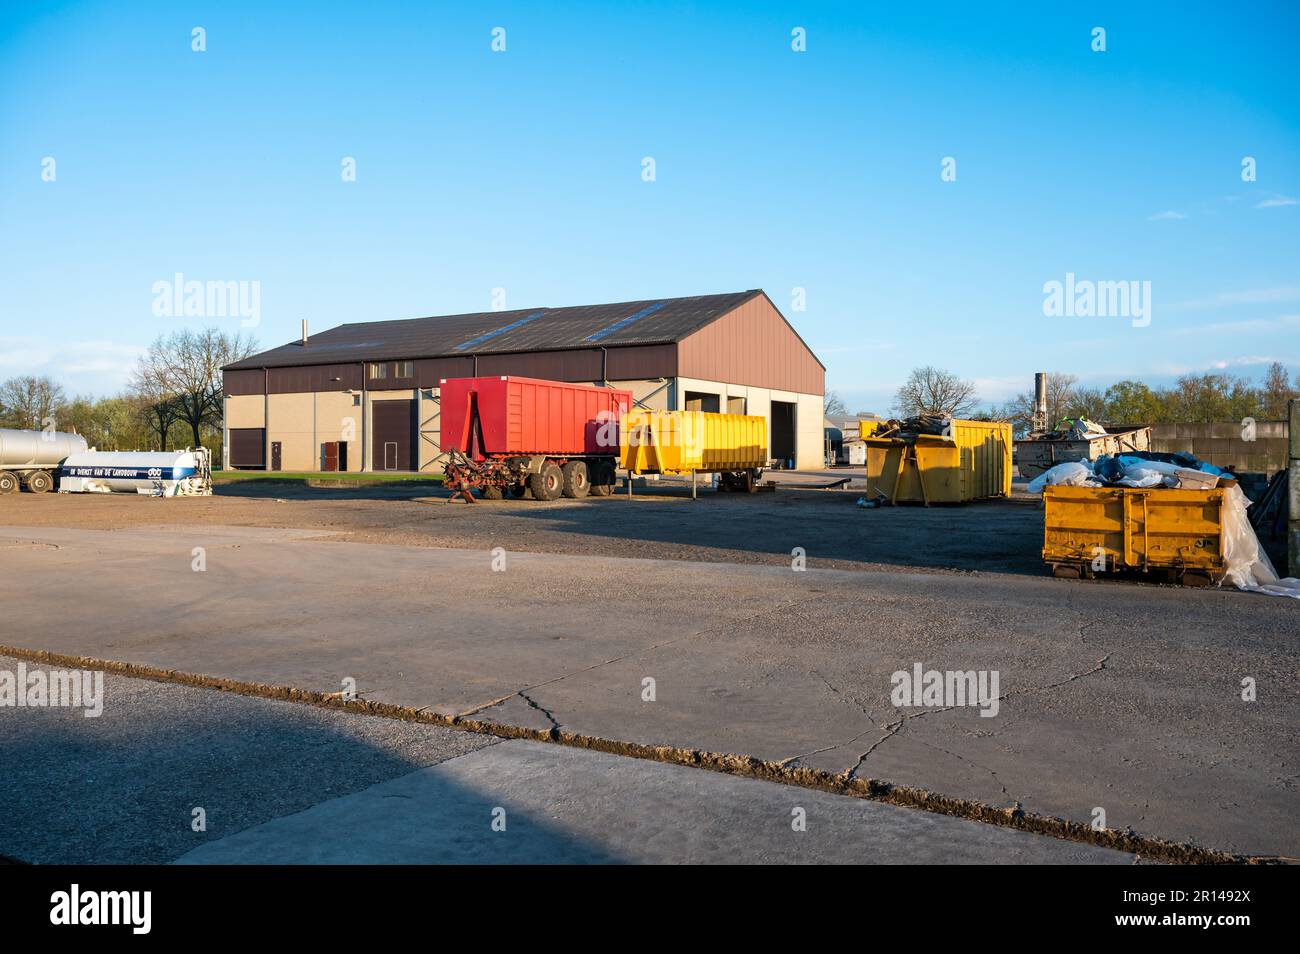 Meerhout, Antwerp Province, Belgium - April 25, 2023 - The main court of a modern farm with barns and agriculture vehicles Stock Photo